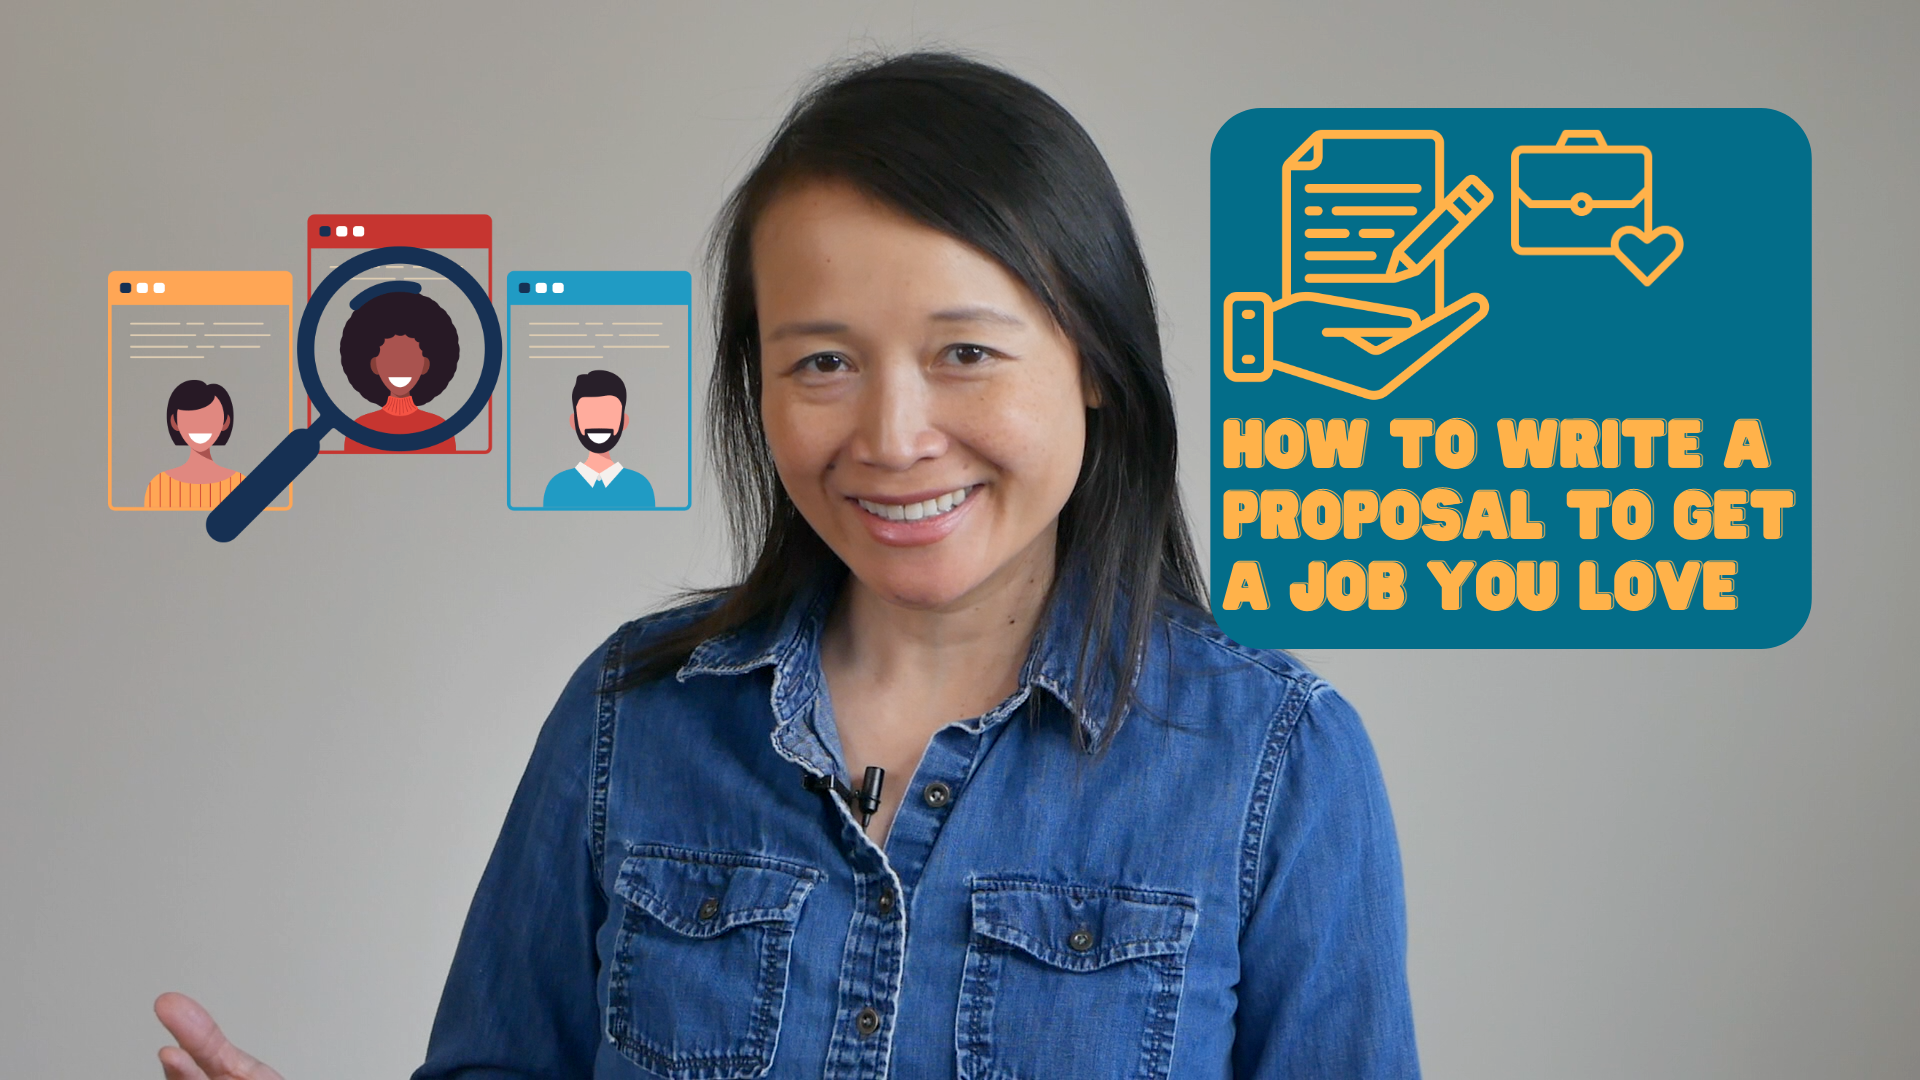 How to Write a Proposal to Get a Job You Love